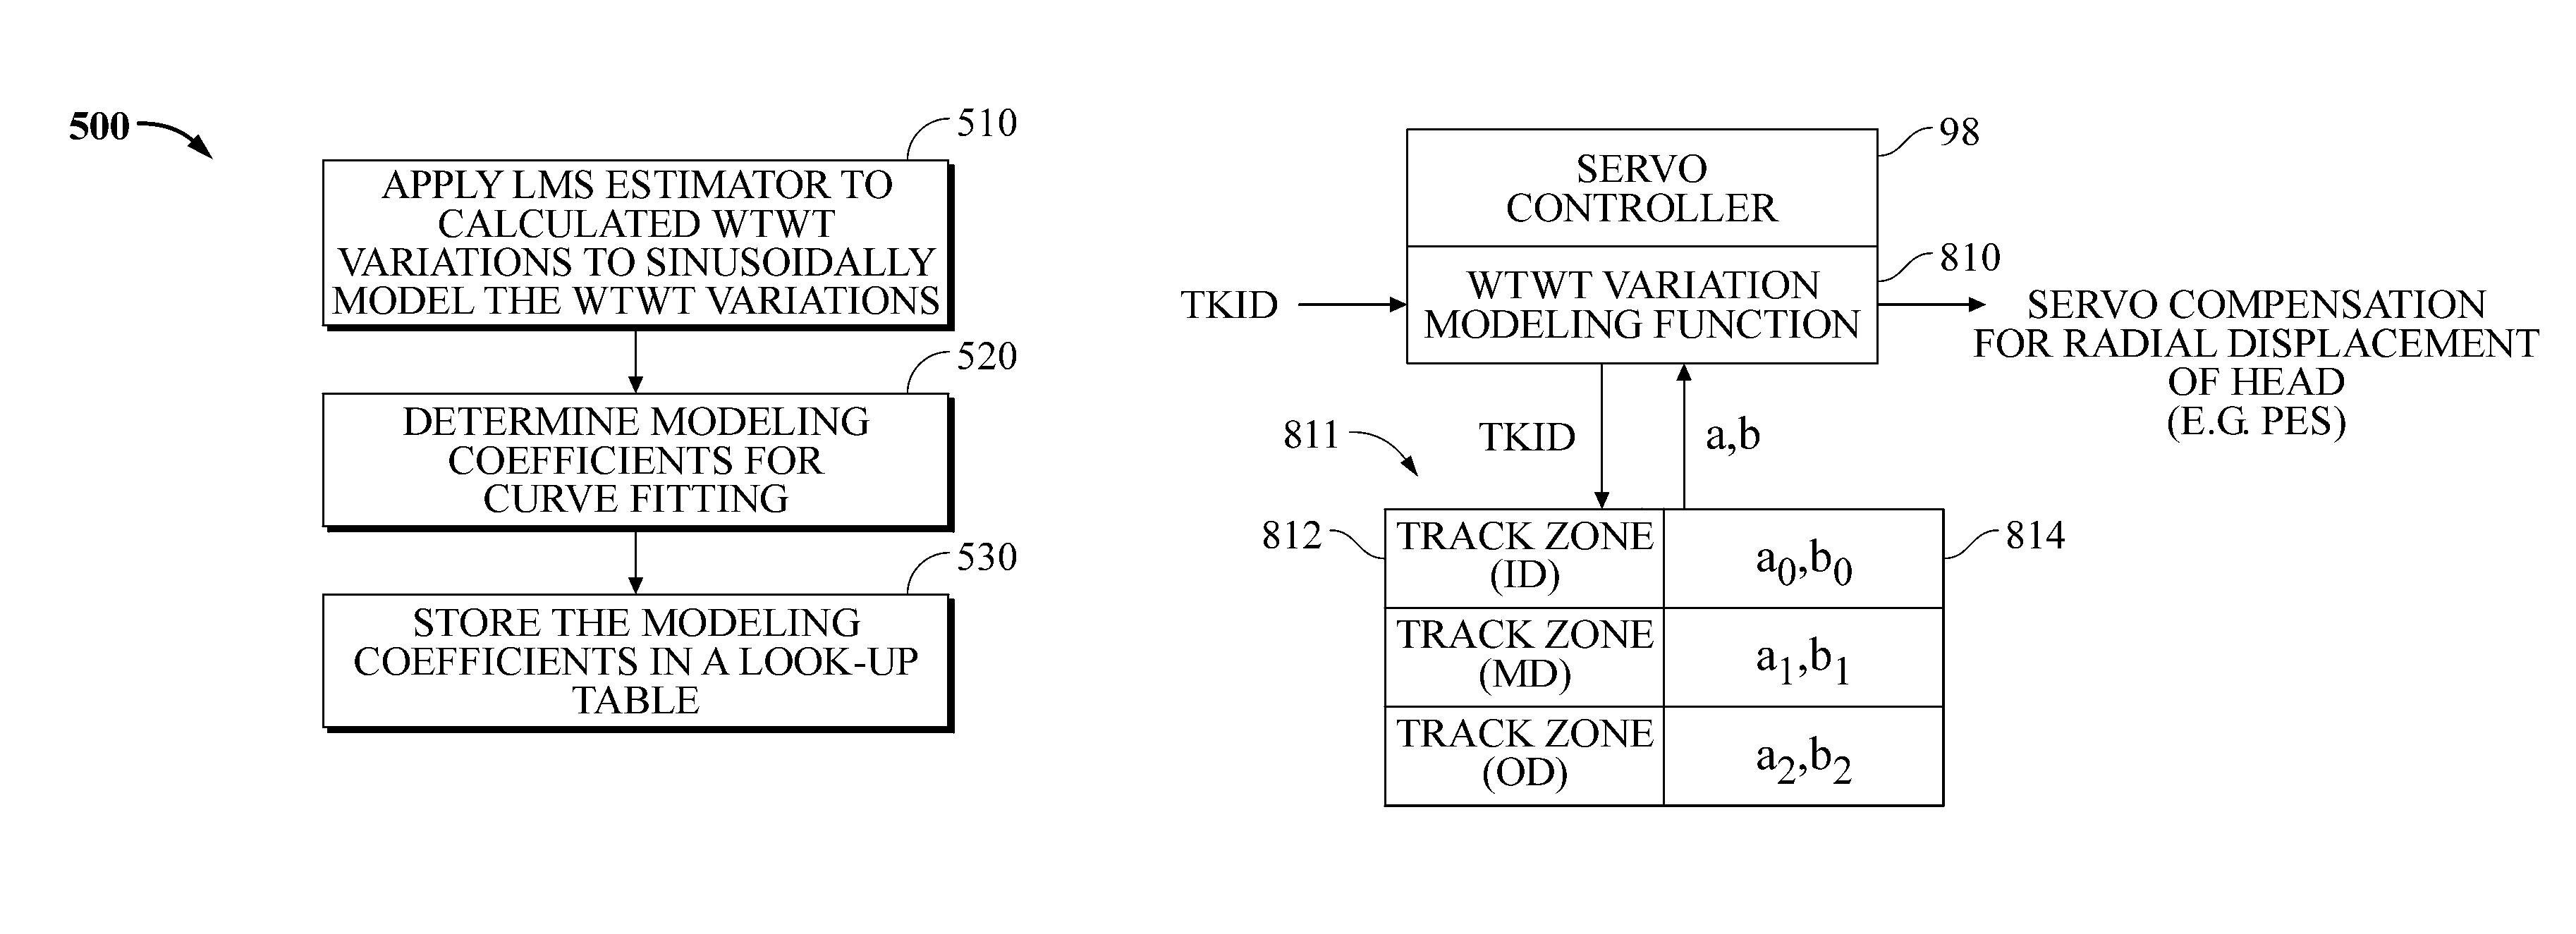 Disk drive to characterize misaligned servo wedges